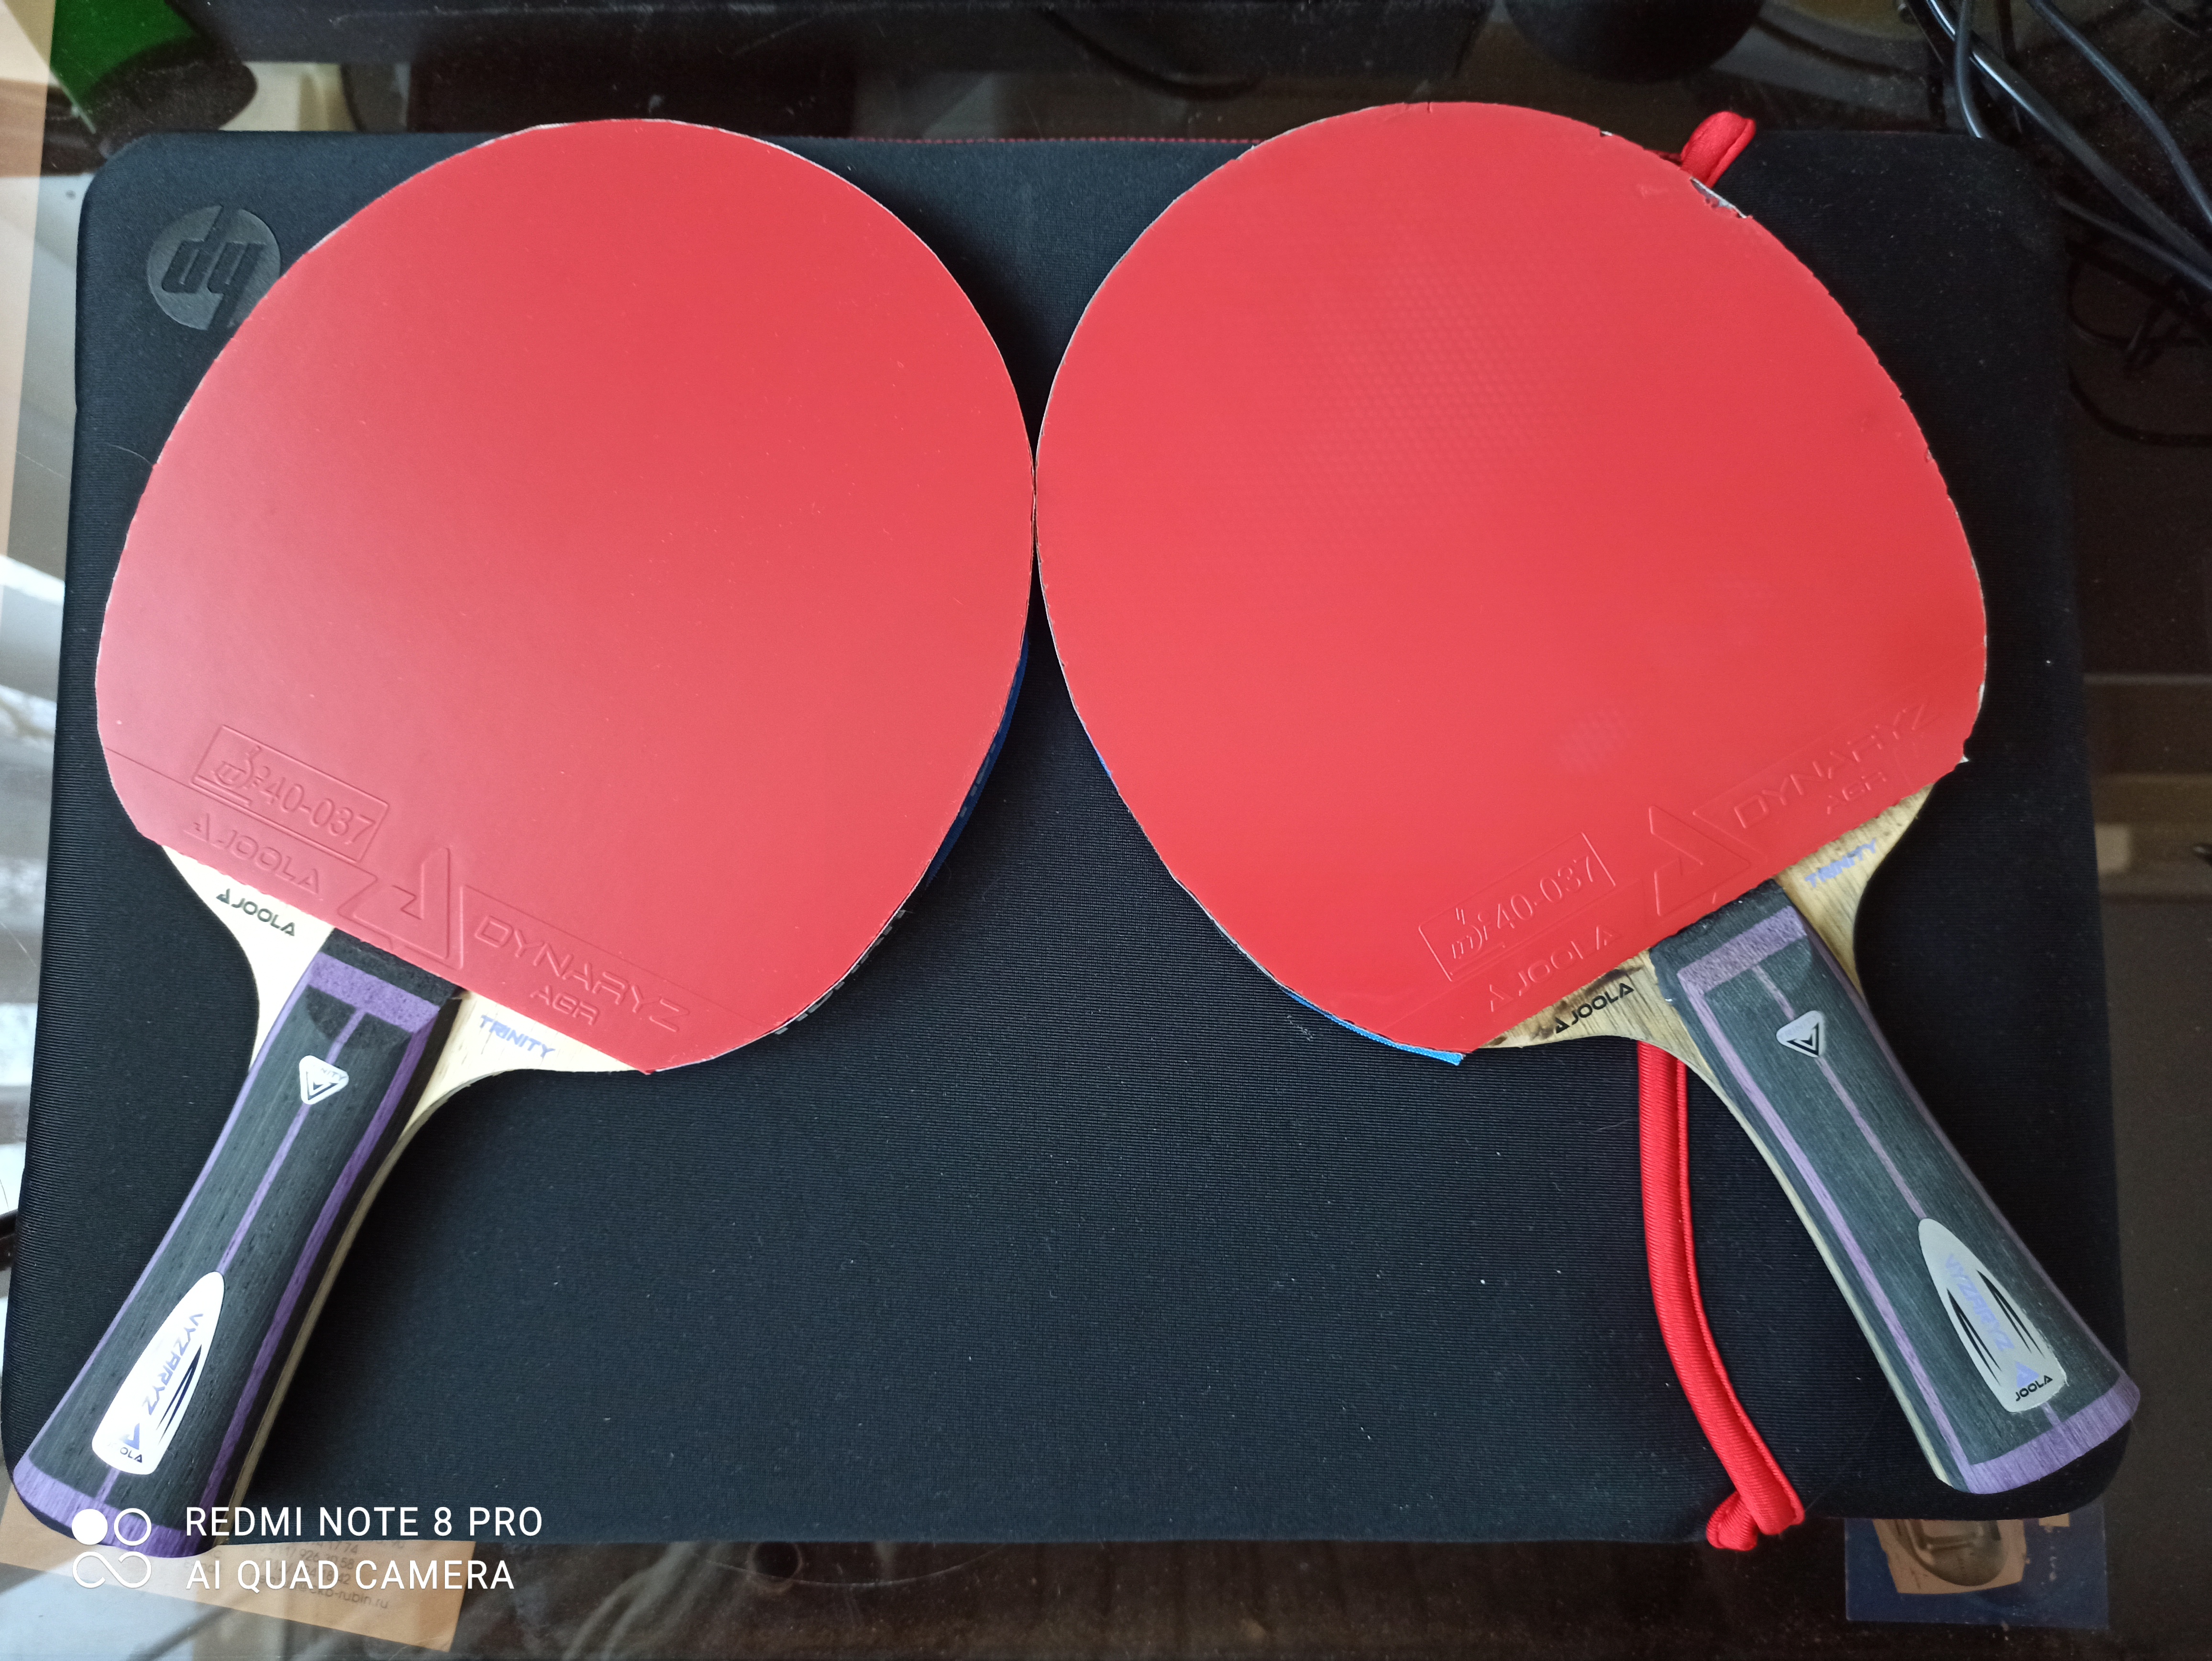 Share your Racket's Photo | Page 40 | TableTennisDaily